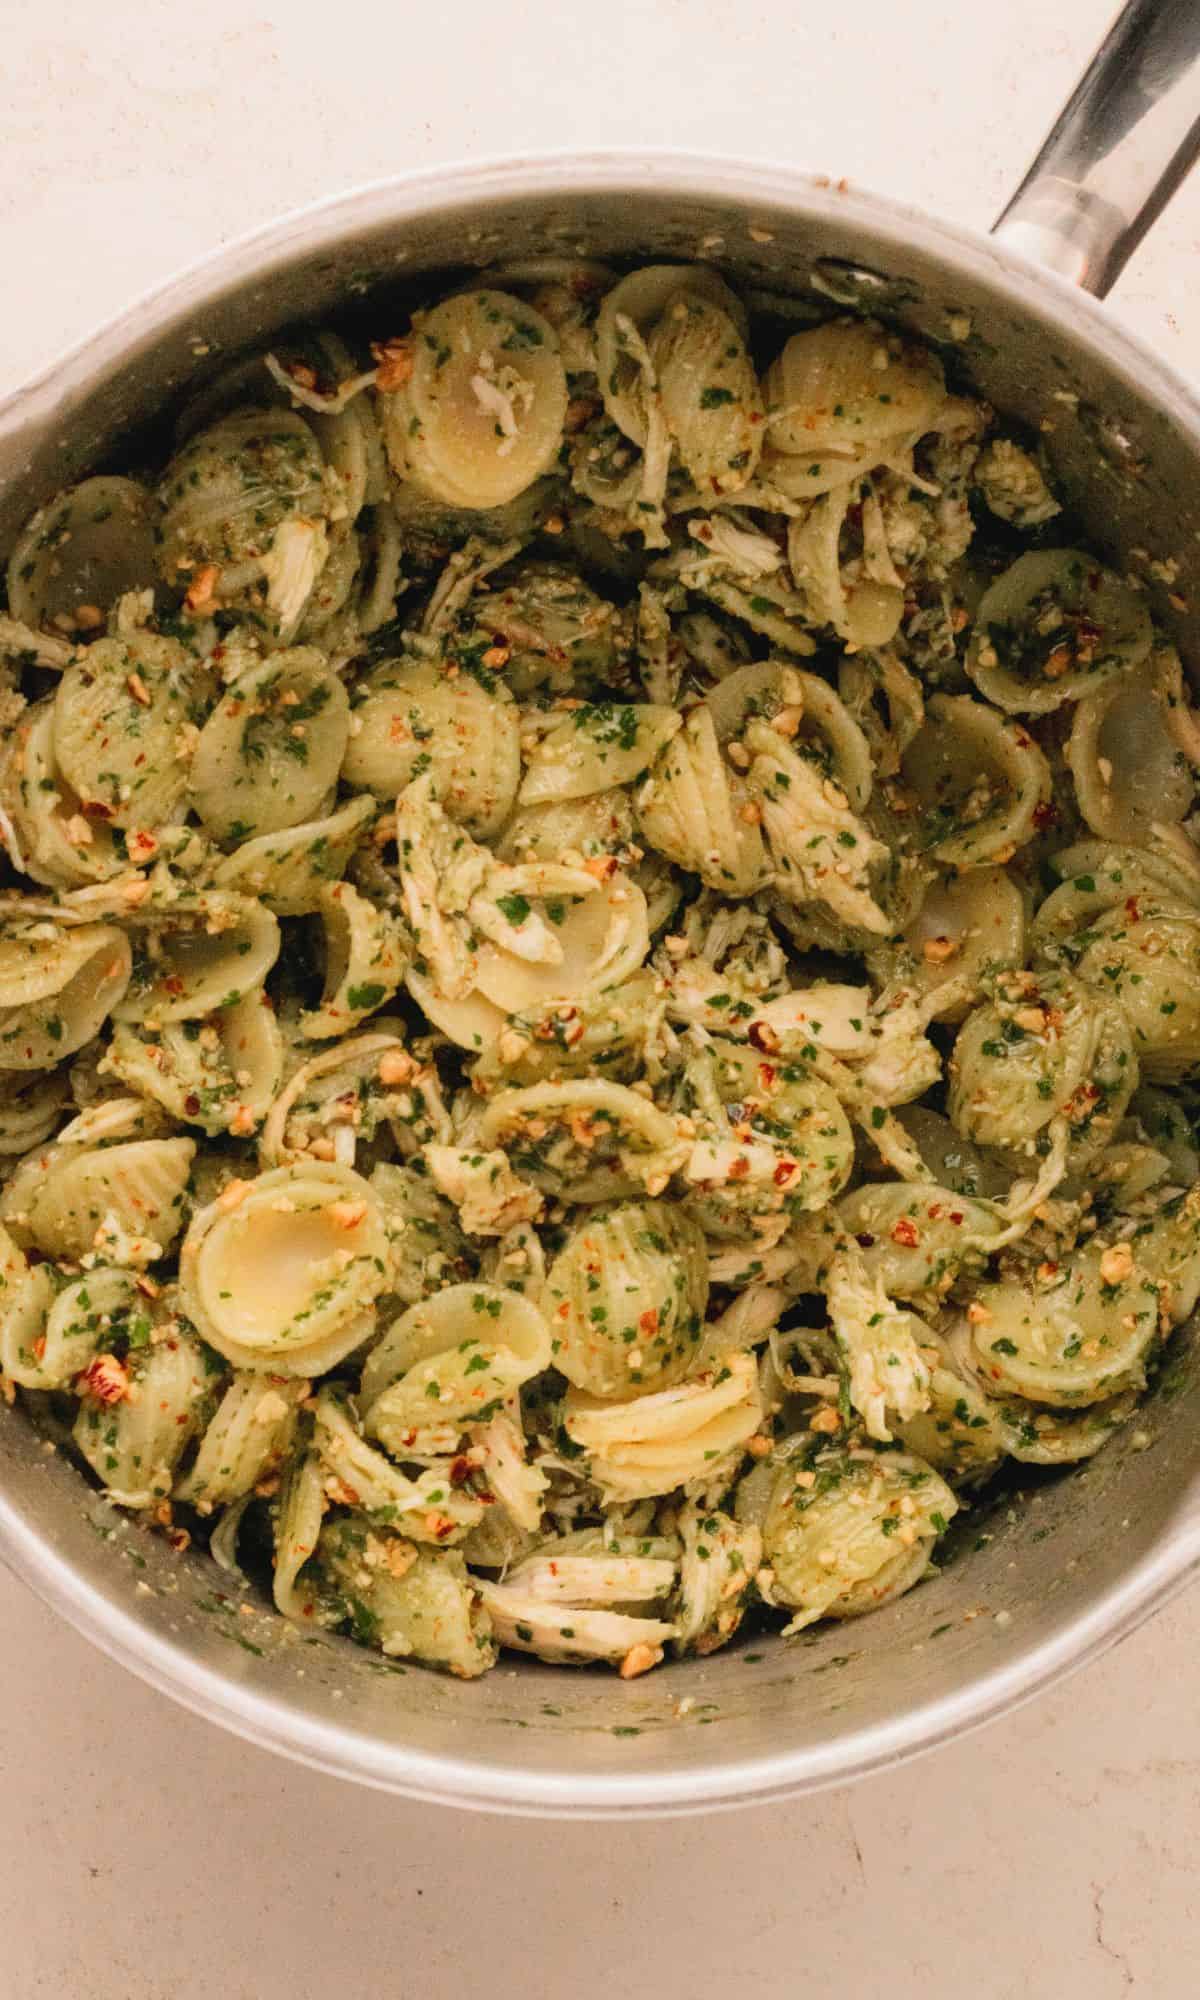 Parlsey pesto with chicken mixed with pasta in a saucepan.